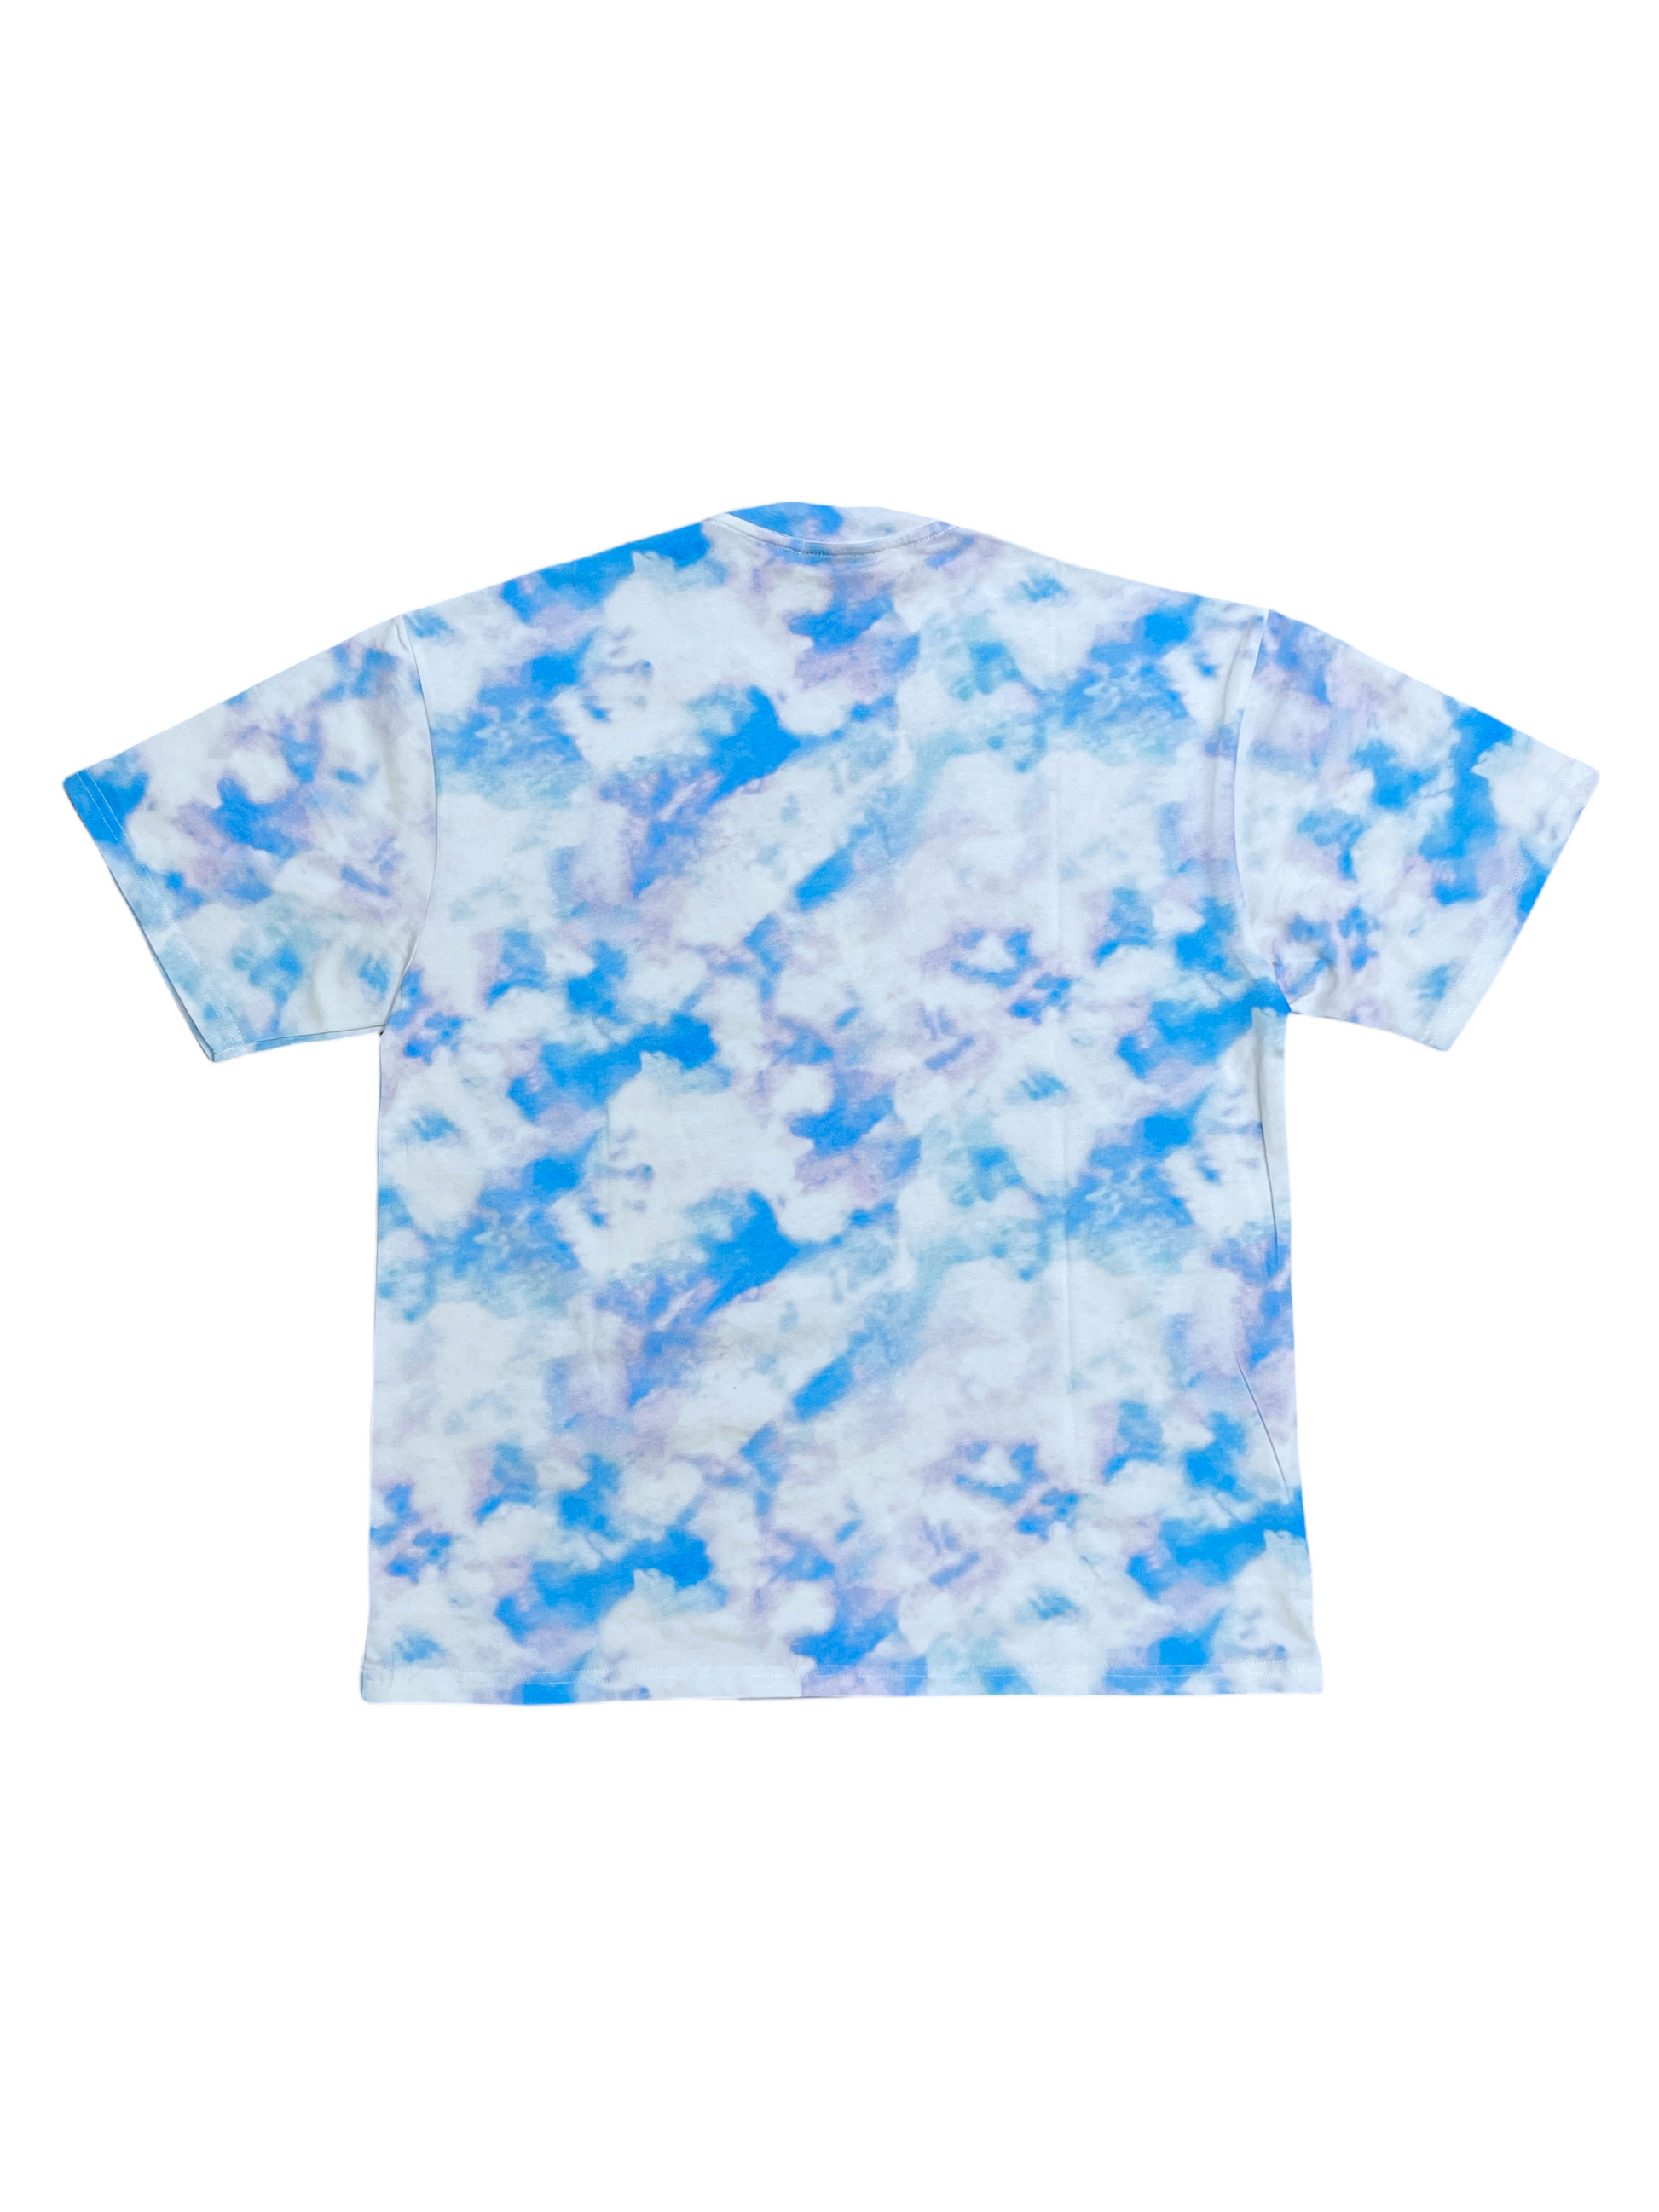 Drew House Blue Tie Dye Graphic Tee Large — Genuine Design luxury consignment Calgary, Alberta, Canada New and pre-owned clothing, shoes, accessories.